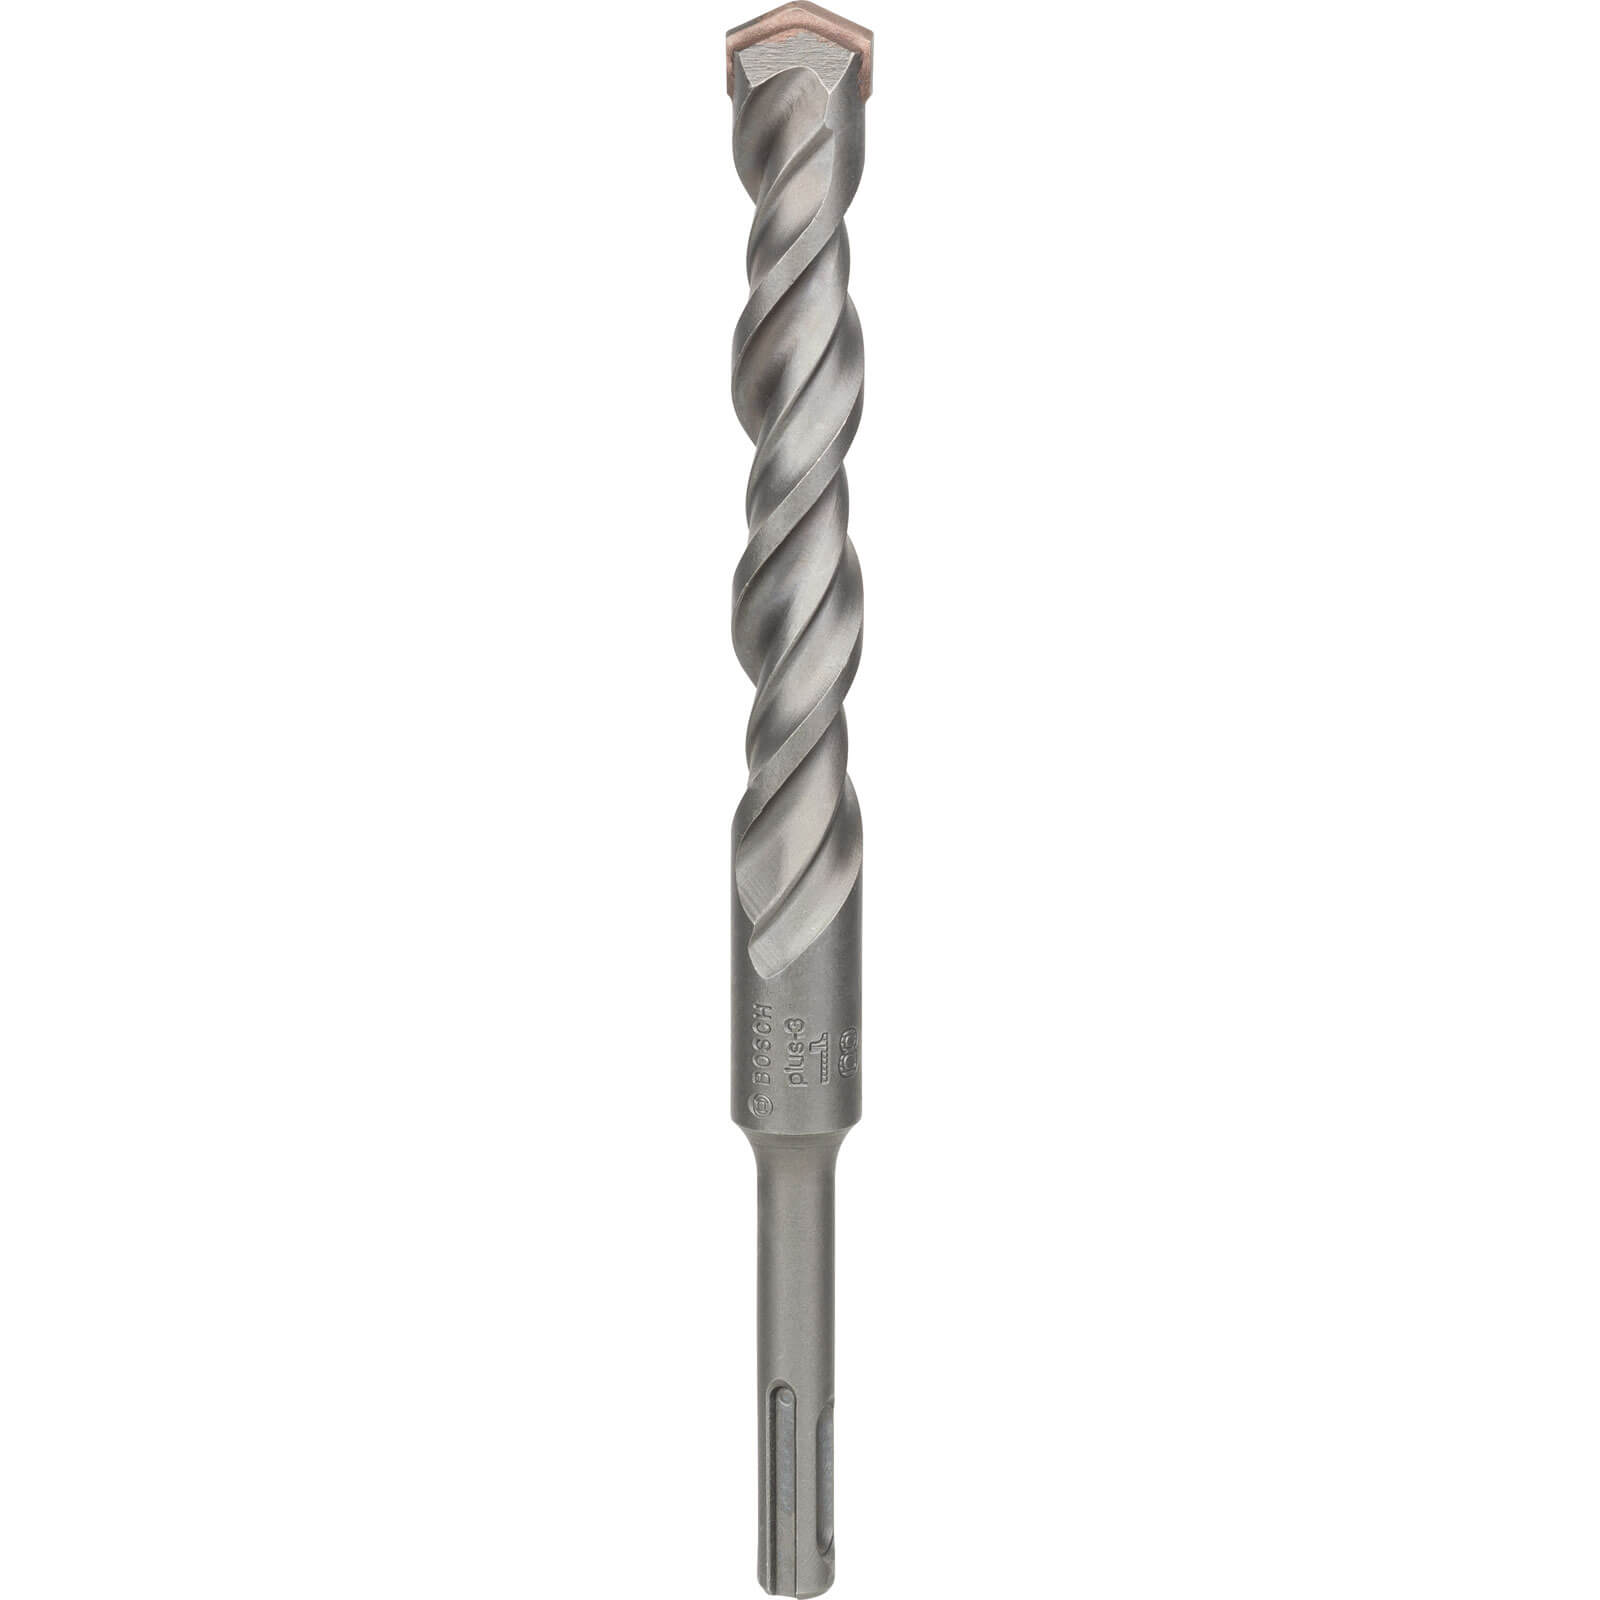 Image of Bosch Series 3 SDS Plus Masonry Drill Bit 18mm 200mm Pack of 1